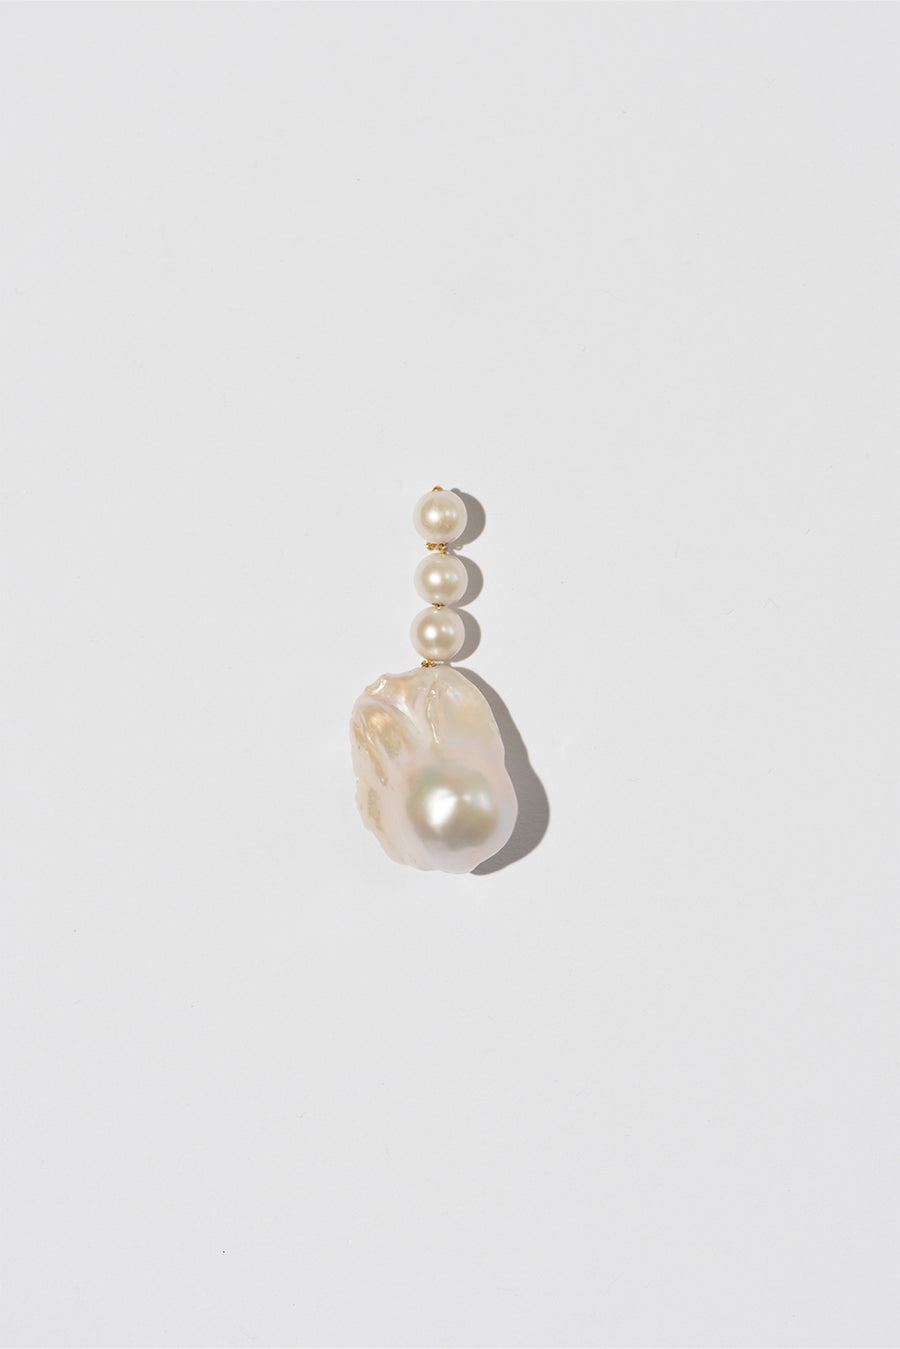 The Pearl Variation Earring